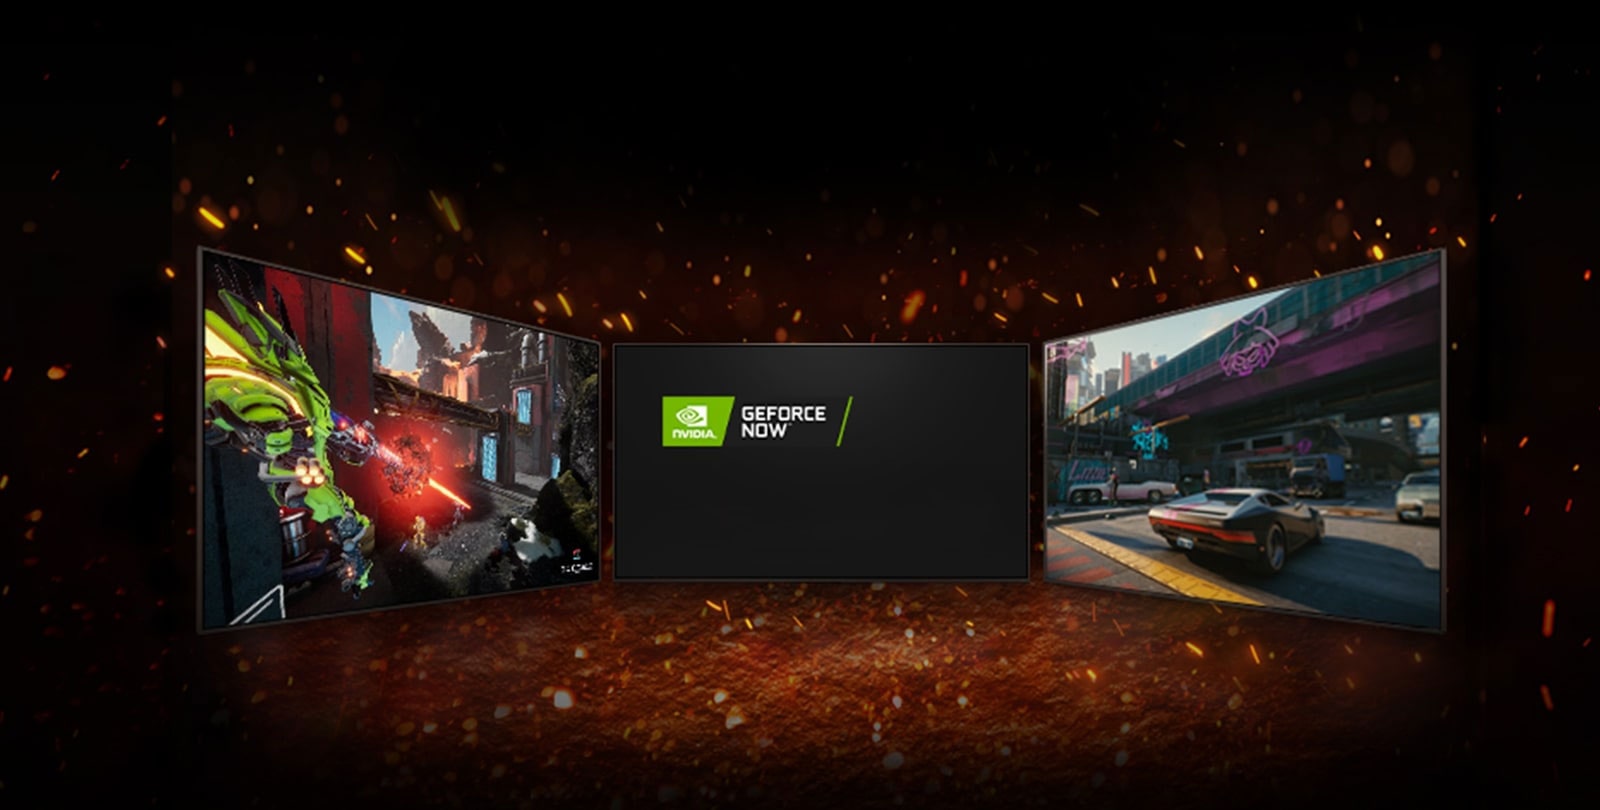 The image shows three TVs. In the center of the screen there are two logos located diagonally: the NVIDIA GeFORCE NOW logo and the STADIA logo. On the left of the TV is the game Splitgate, on the right is Cyberpunk 2077. 